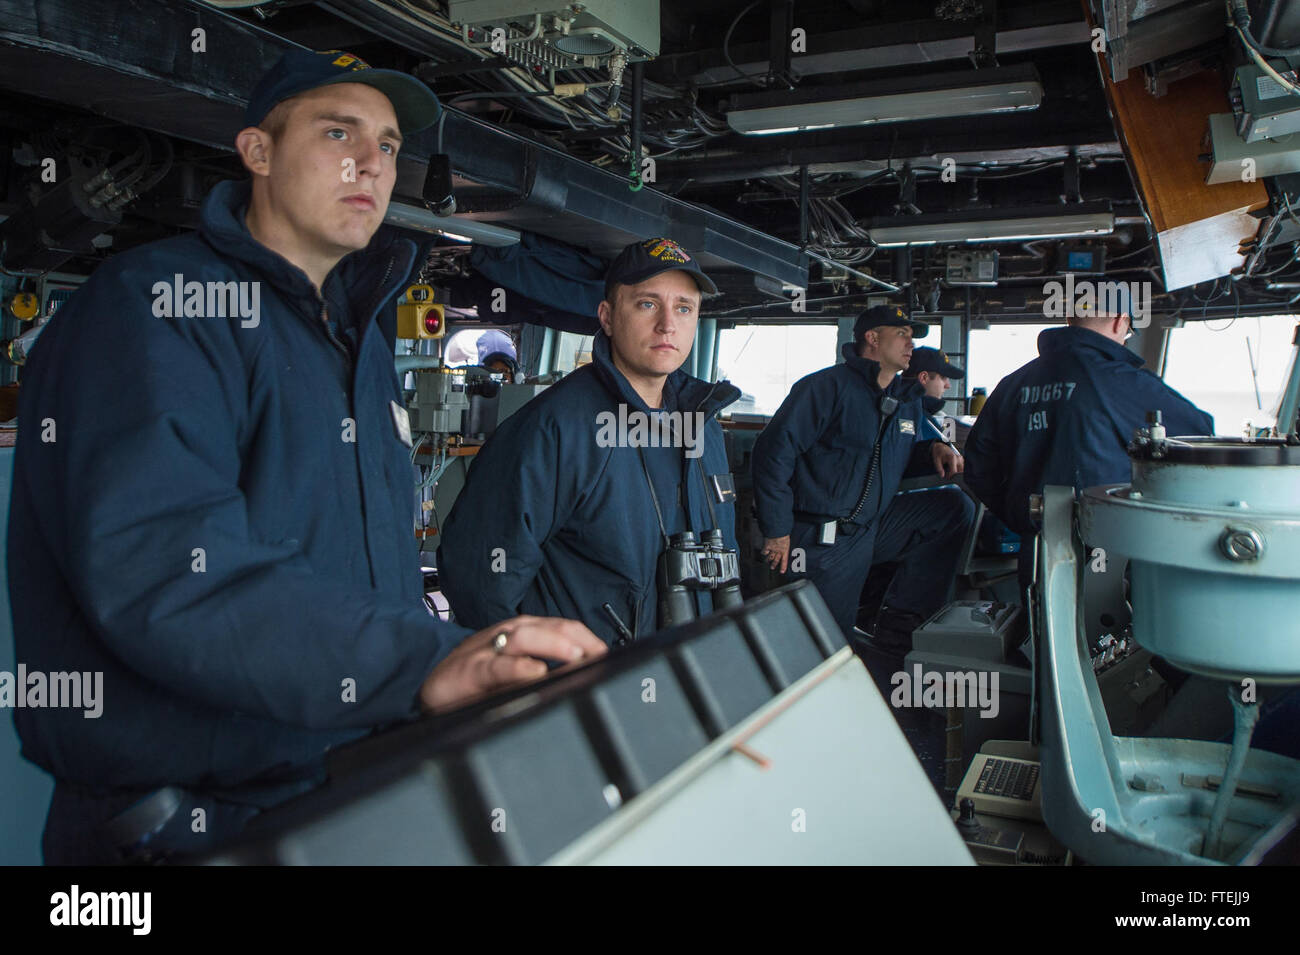 AUGUSTA BAY, Italy (Dec. 11, 2014) – Ensign Samuel Hadik, center, from Chester, New Hampshire, monitors oncoming civilian merchant traffic as USS Cole (DDG 67) departs Augusta Bay following a scheduled port visit Dec. 11 2014. Cole, an Arleigh Burke-class guided-missile destroyer, homeported in Norfolk, is conducting naval operations in the U.S. 6th Fleet area of operations in support of U.S. national security interests in Europe. Stock Photo